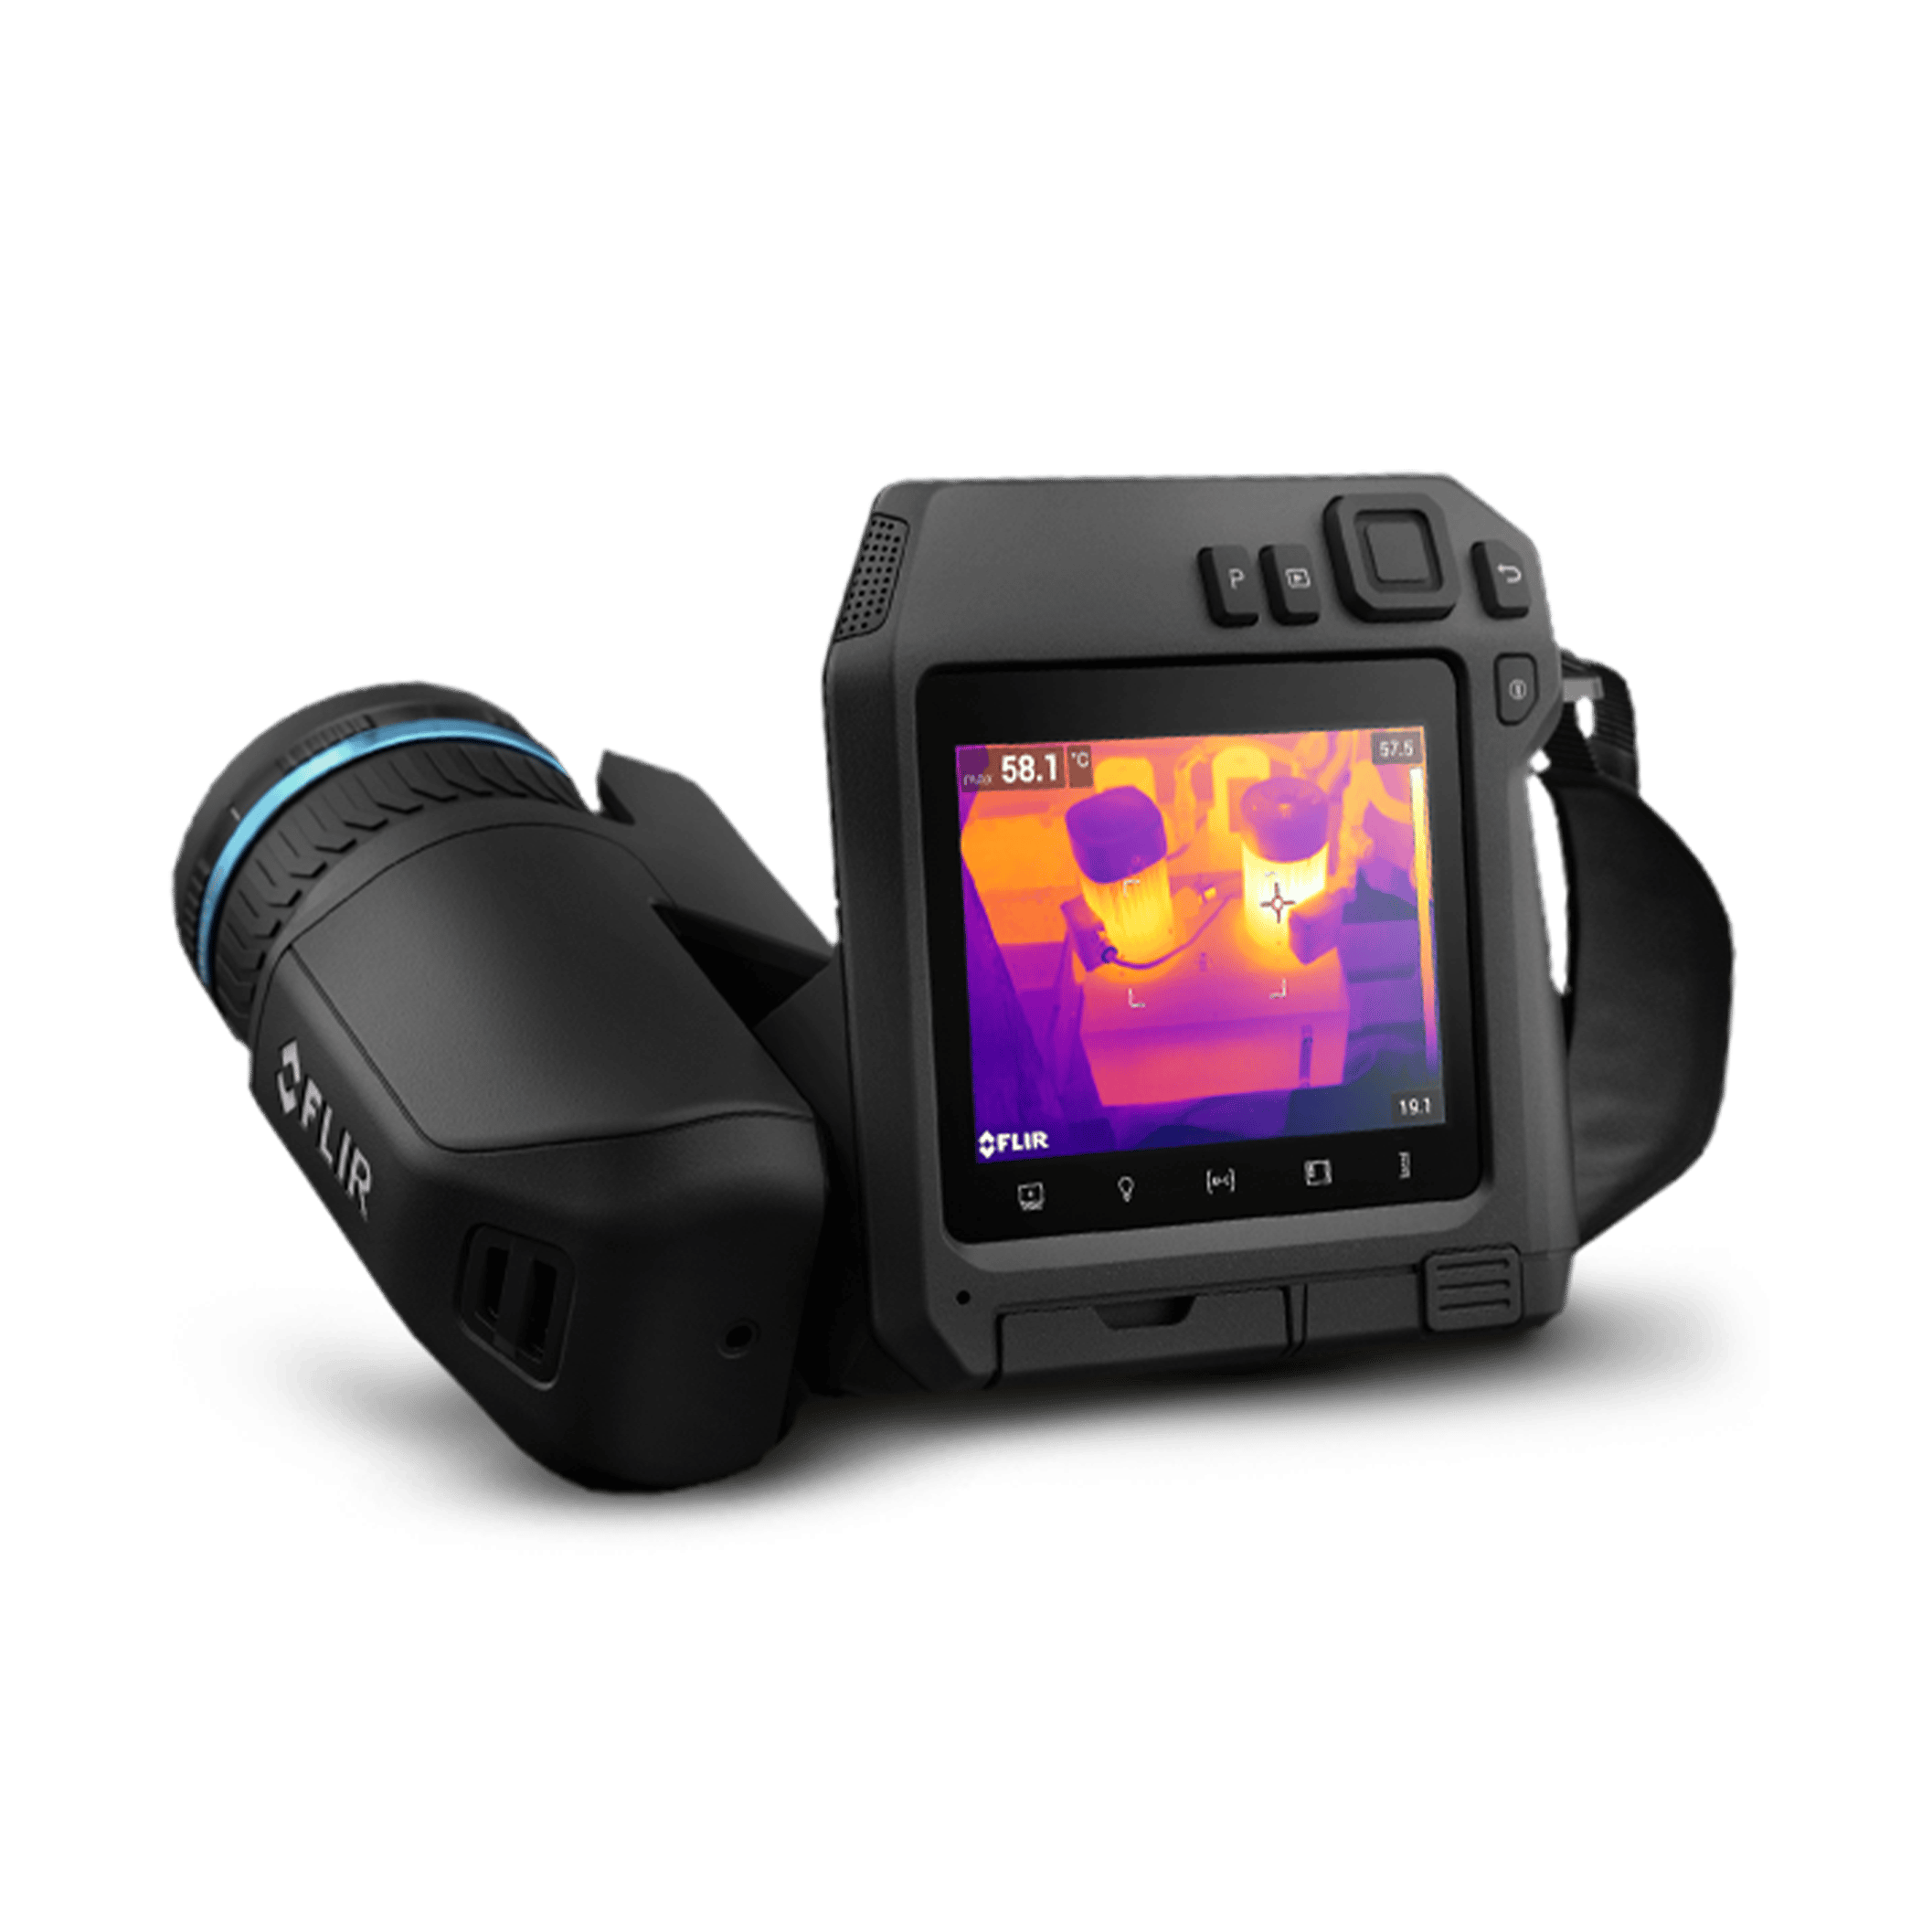 An image of a FLIR thermal imaging camera with viewfinder